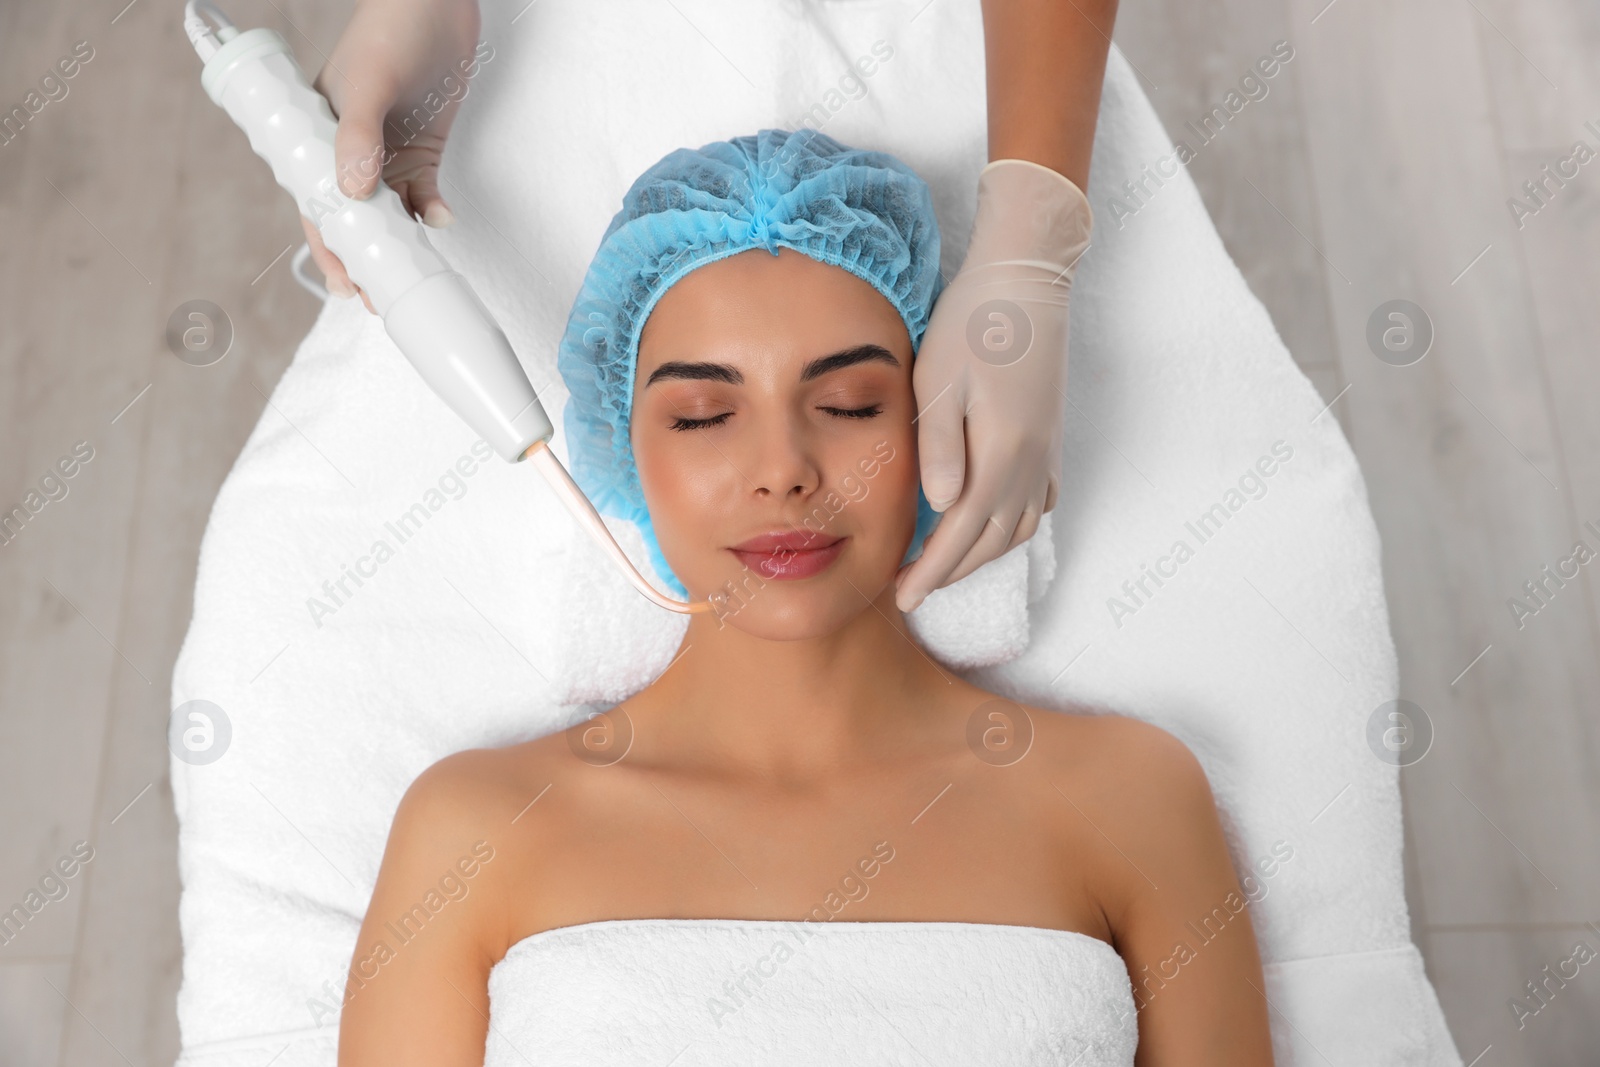 Photo of Young woman undergoing face rejuvenation procedure with darsonval in salon, top view